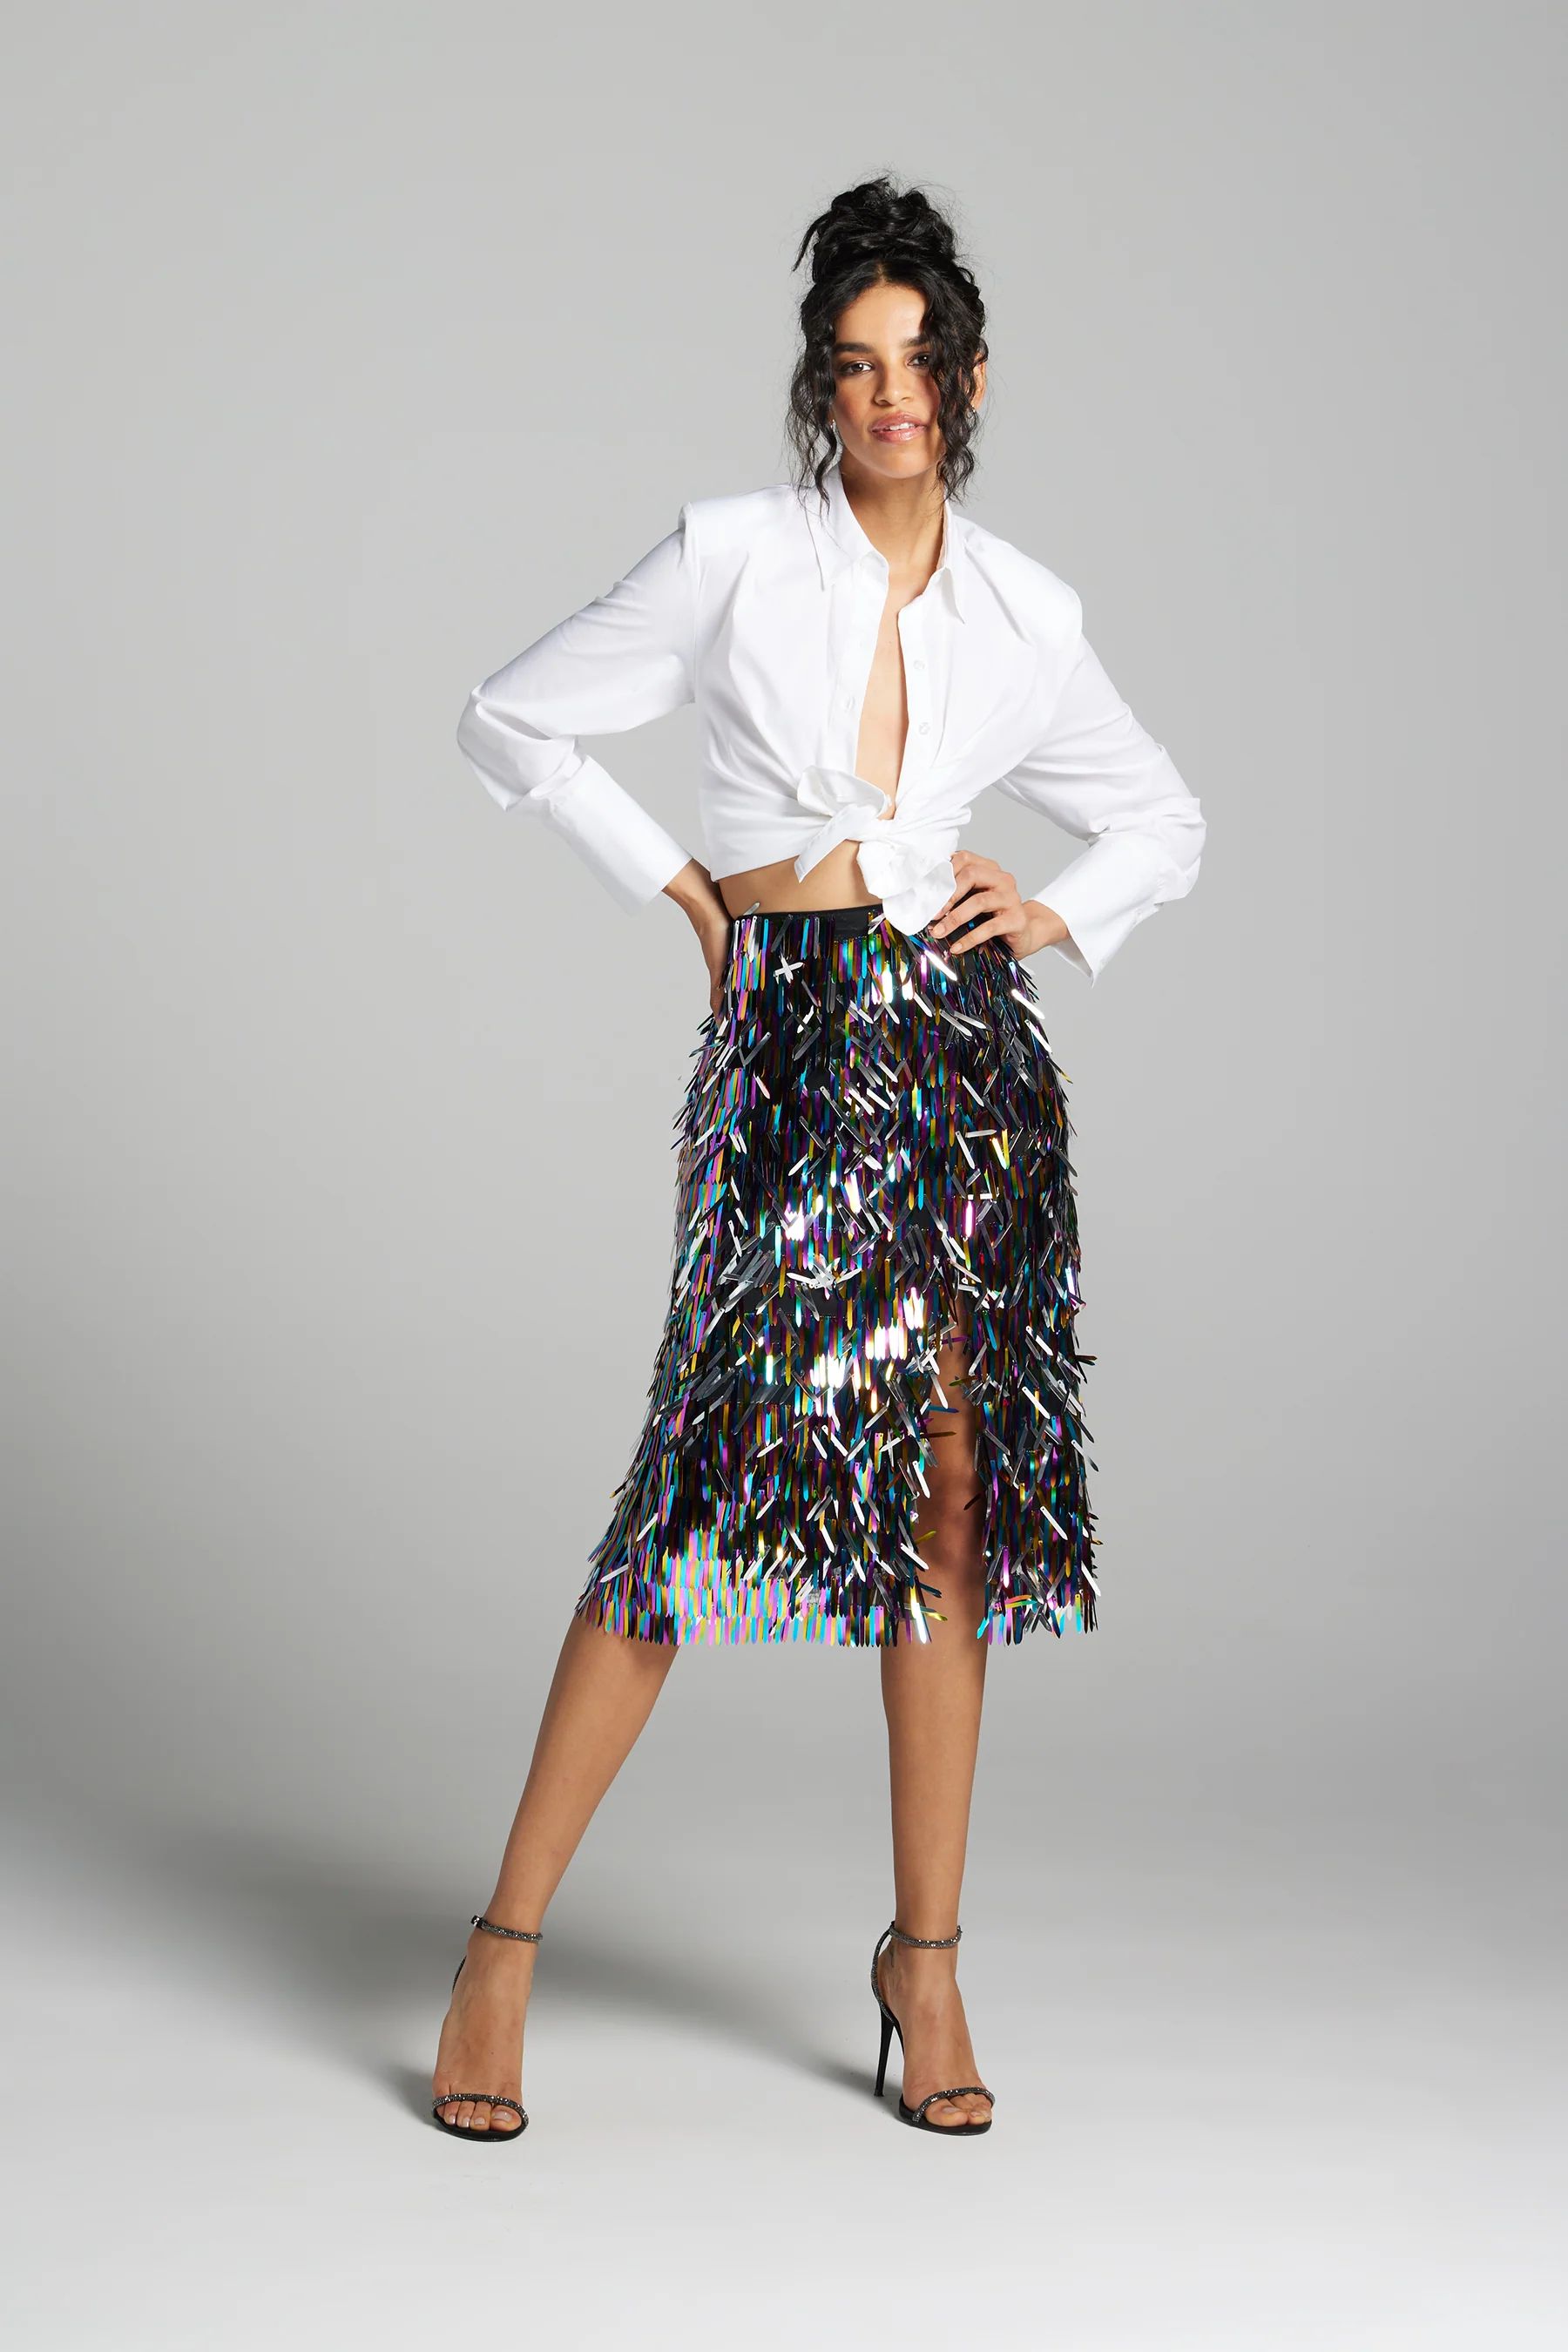 Gabrielle Union Women's Midi Sequins Skirt in Multi XL Lord & Taylor | Lord & Taylor